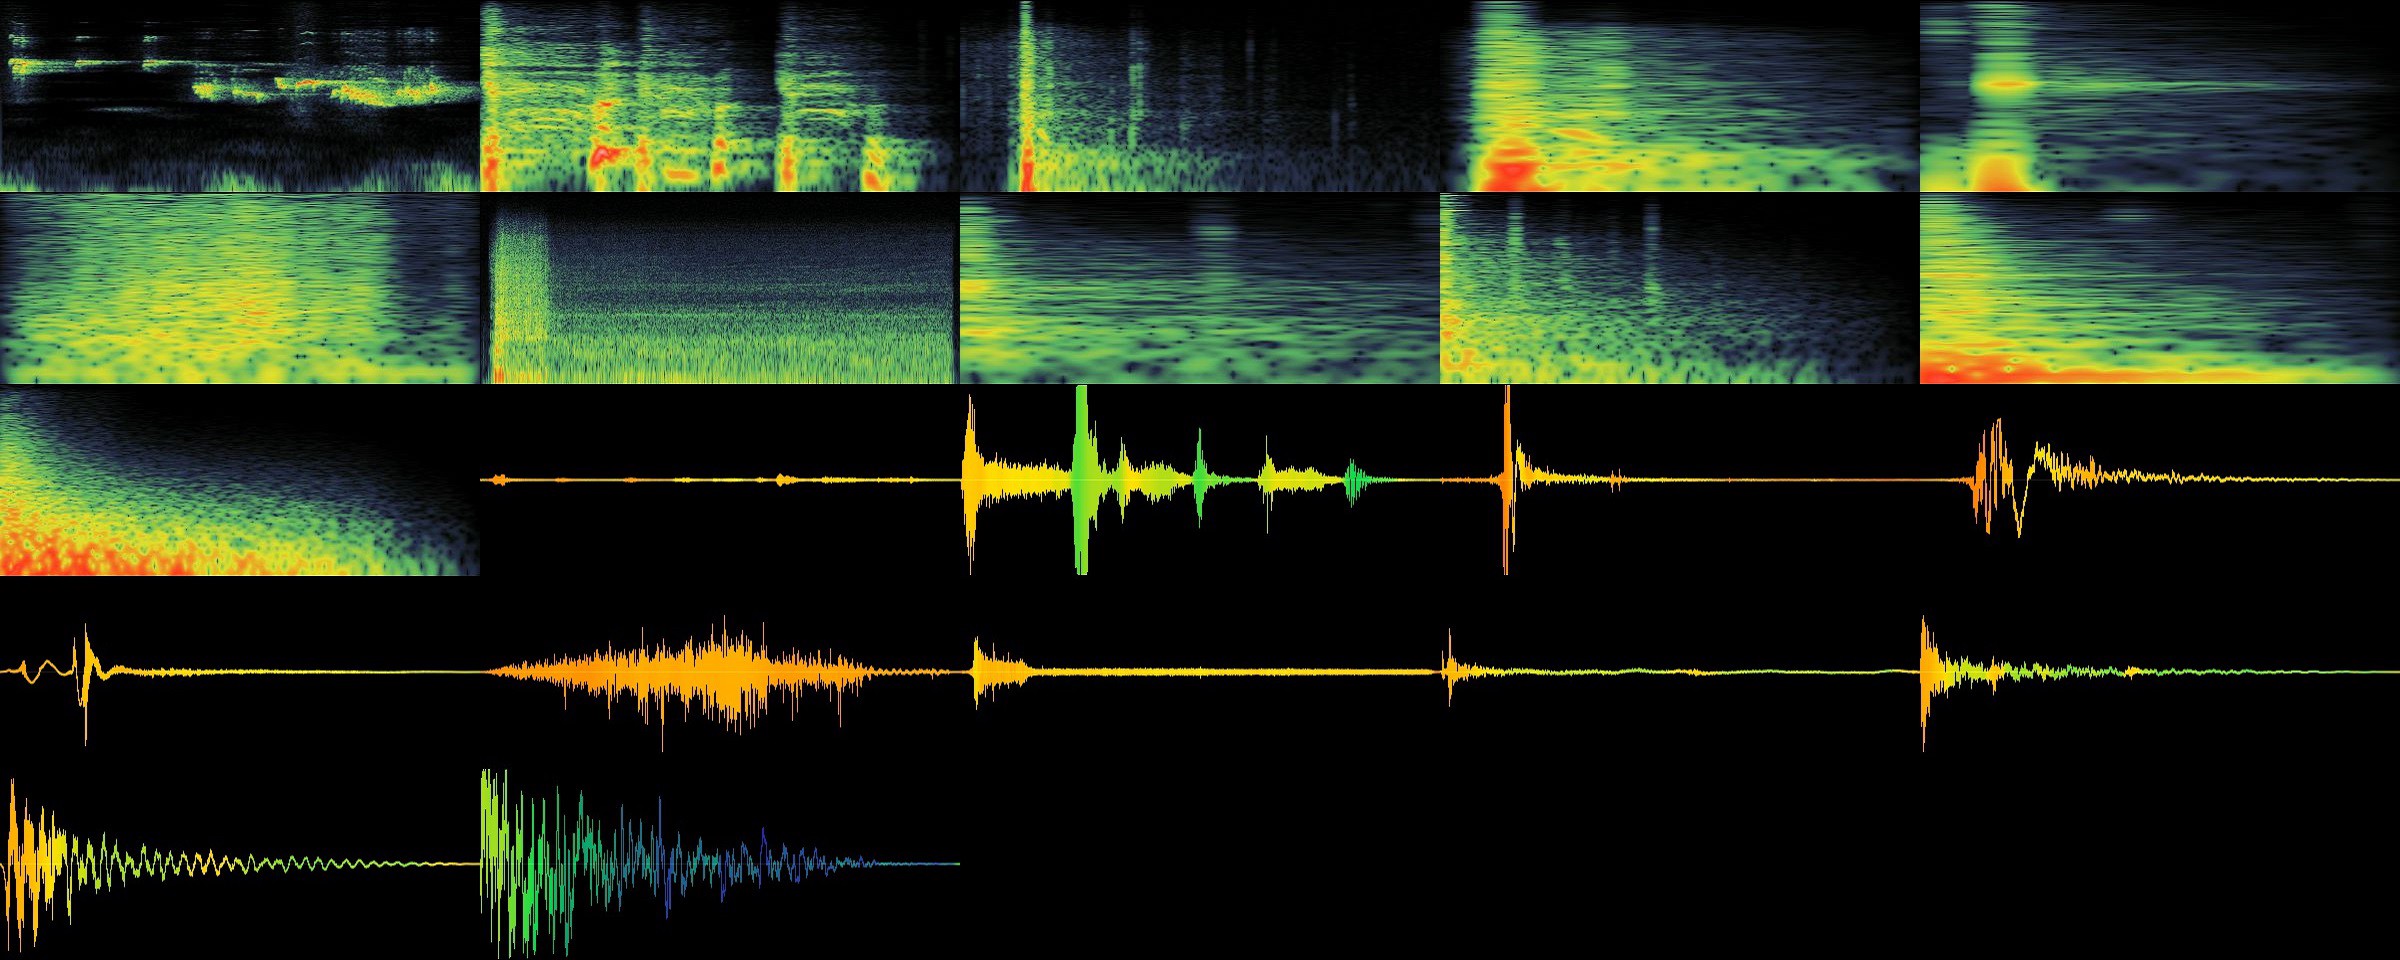 A grid of different audio waveforms in green on a black background.